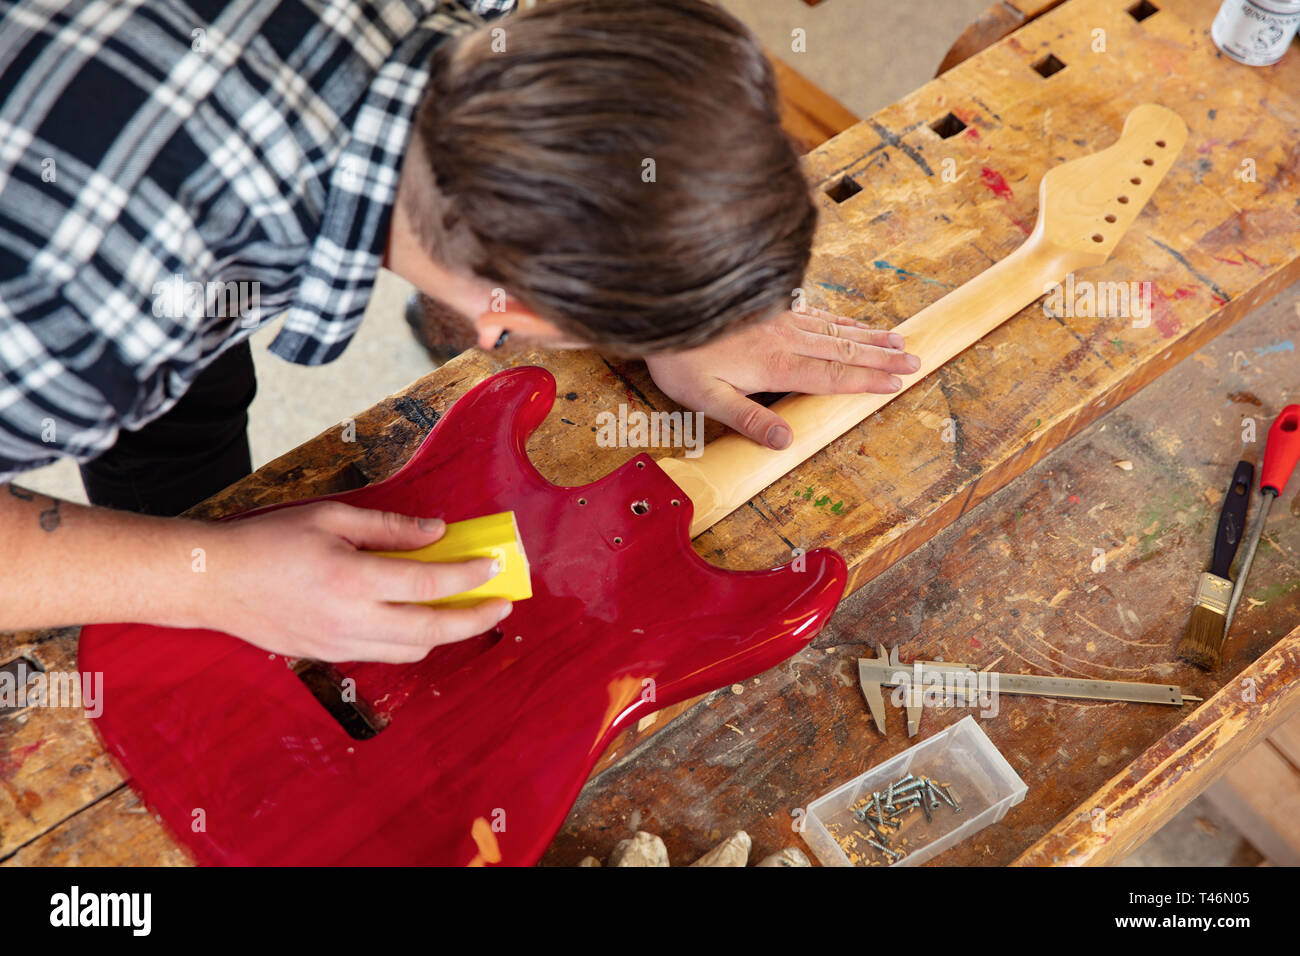 Top view of craftsman sanding a guitar neck in wood at workshop Stock Photo